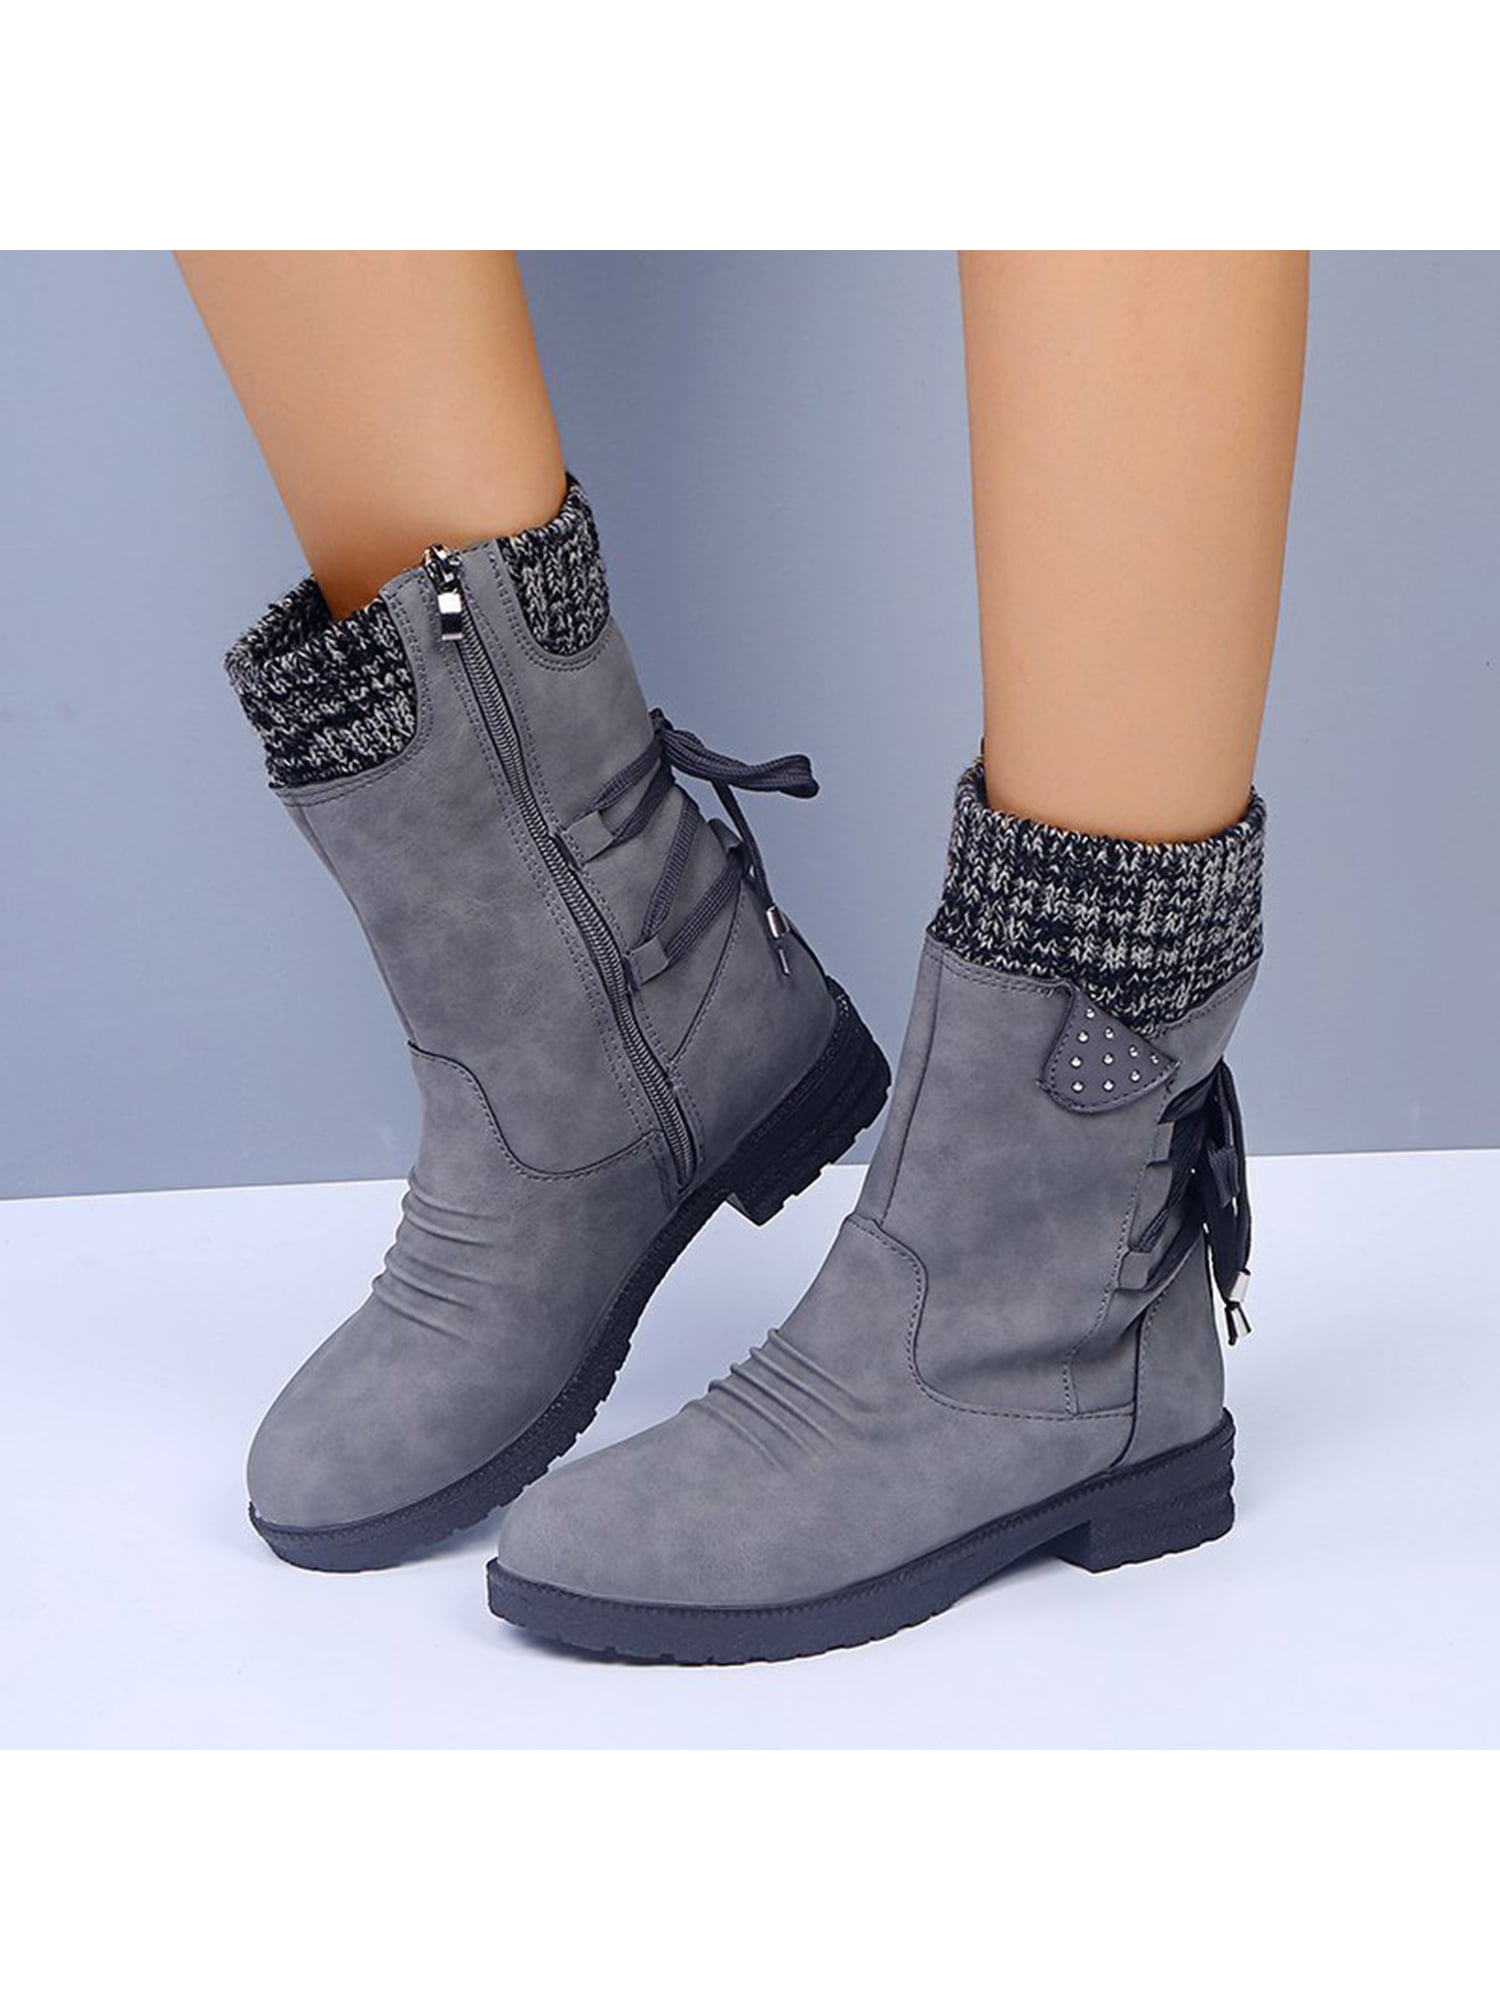 Details about   Hot Womens Snow Fur Furry Winter Warm Ankle/Mid calf Boots Casual Shoes Size New